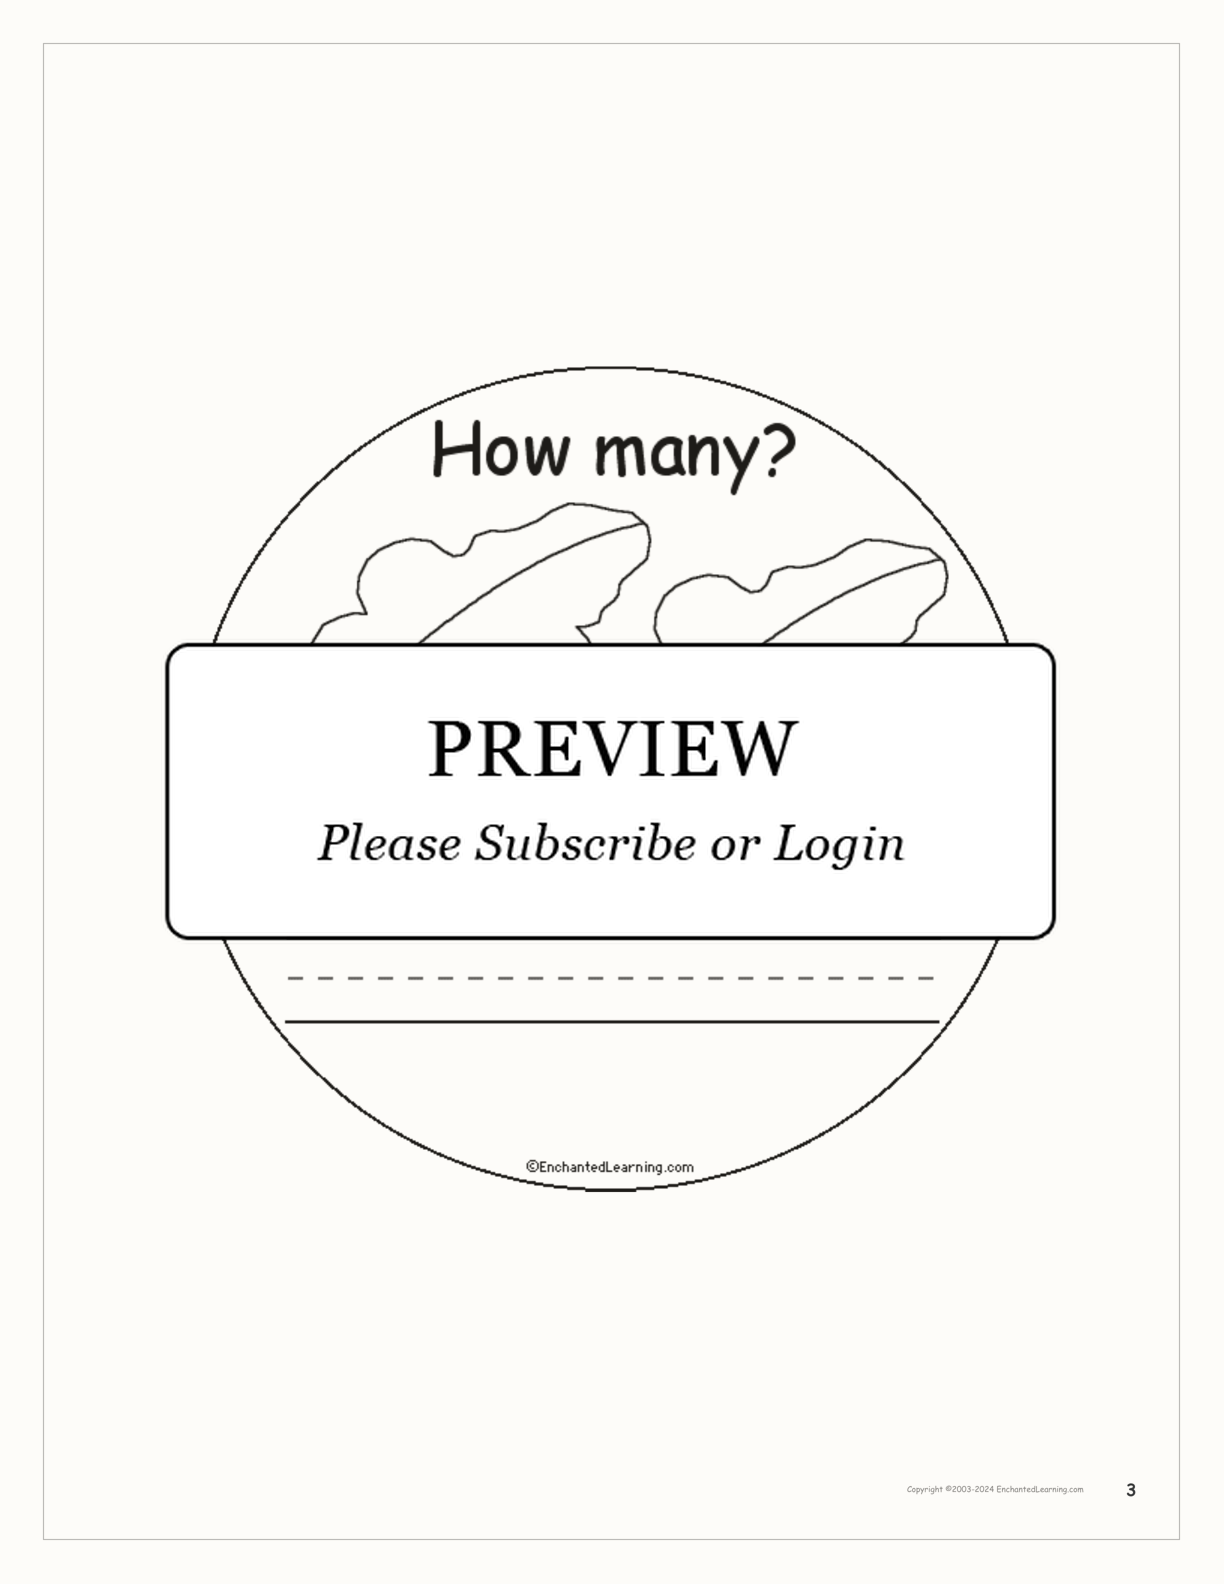 How Many Leaves? interactive printout page 3